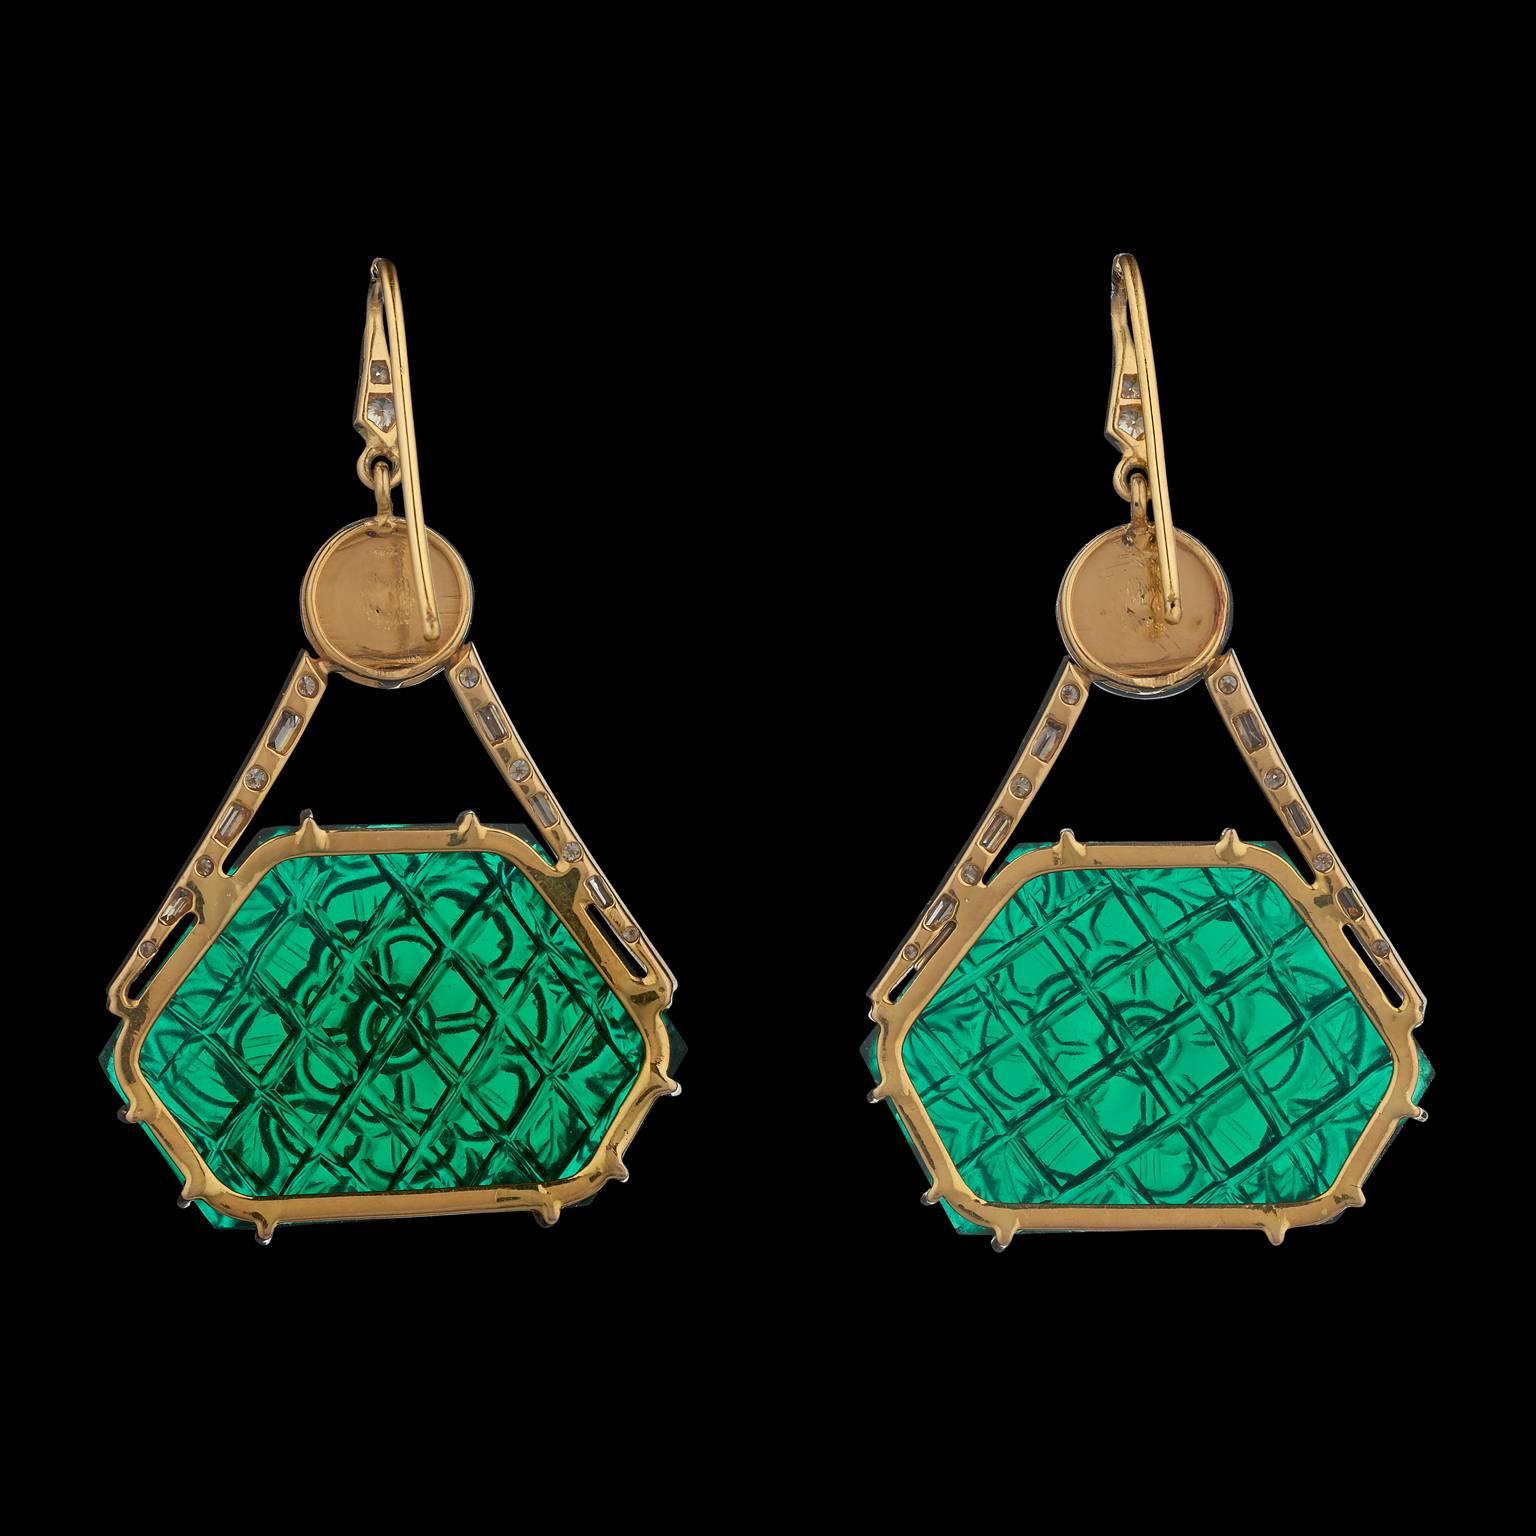 A pair of modern Indian earrings in gold set with diamonds and each with a hexagonal carved green crystal central medallion simulating Mughal carved emeralds. The medallions are suspended each from a single emerald bead drilled in the old style with